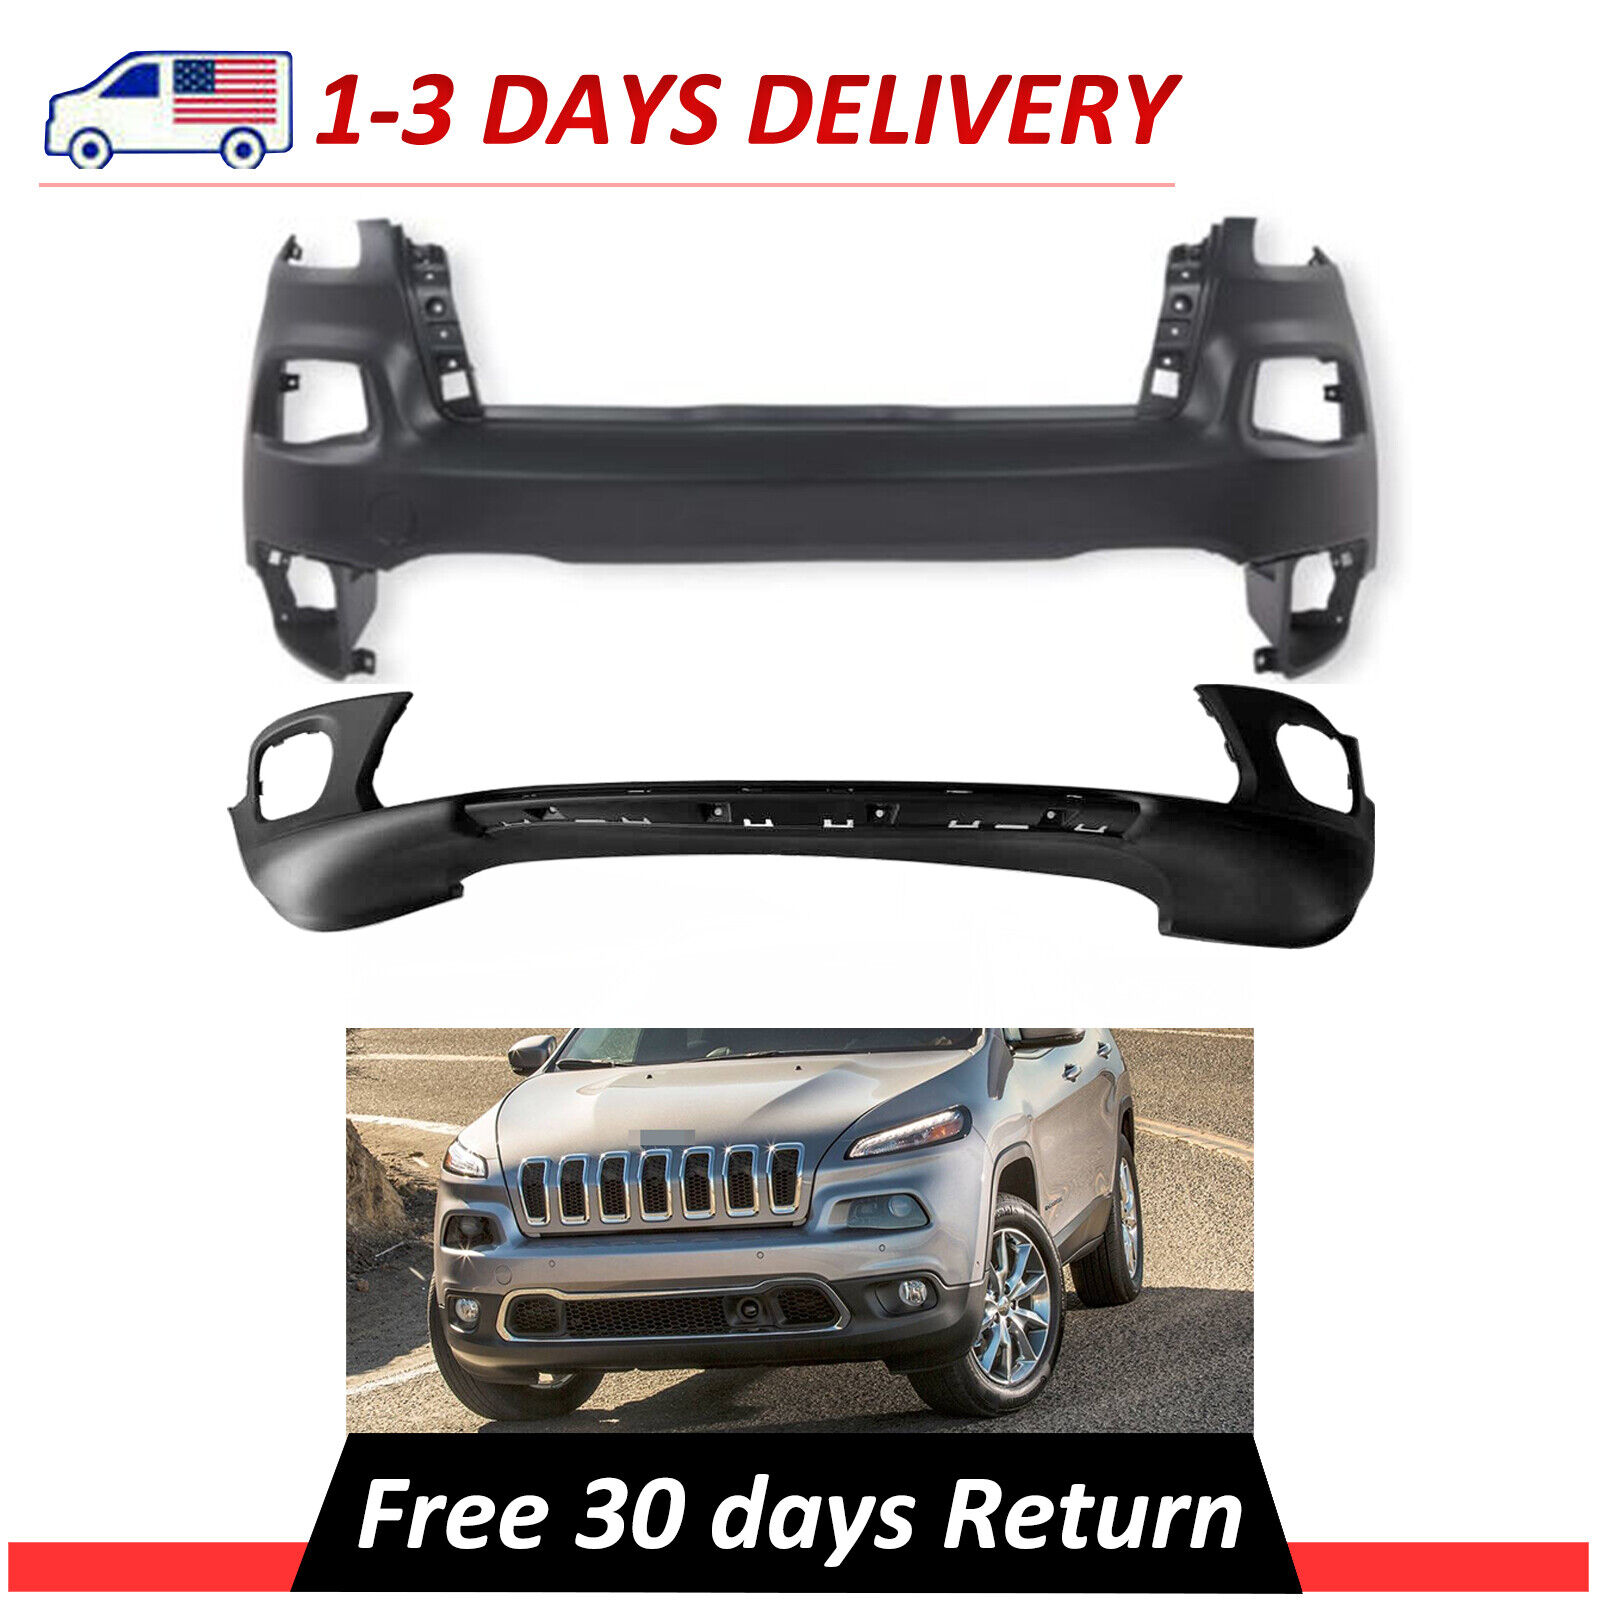 NEW For Jeep Cherokee CH1014112, CH1015119 2PCS Front Bumper Covers Fascias 